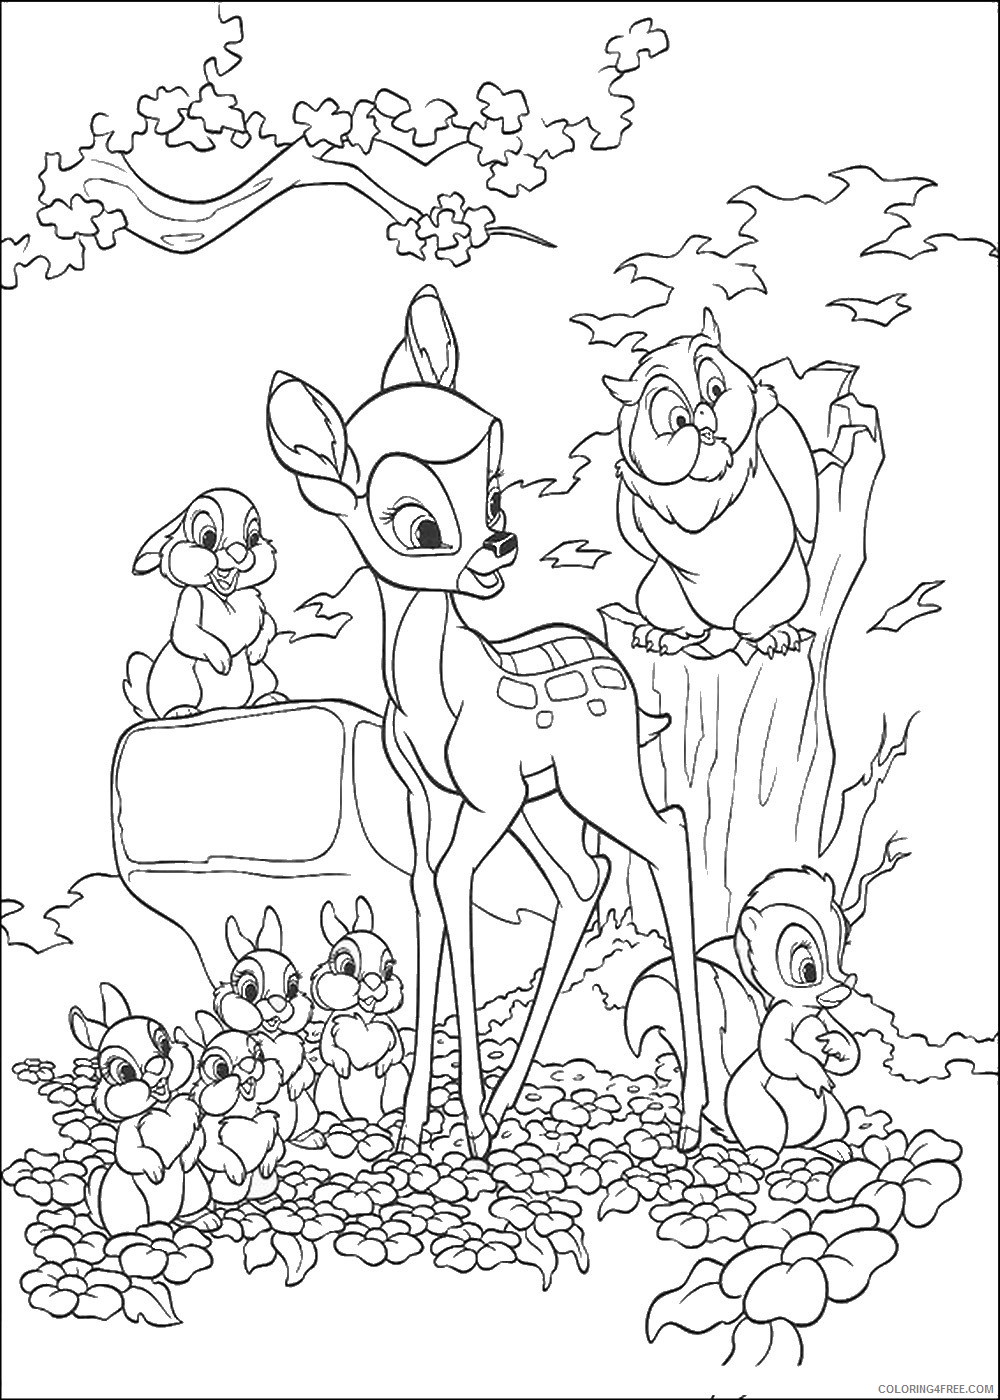 Bambi Coloring Pages Cartoons bambi_cl_05 Printable 2020 0931 Coloring4free